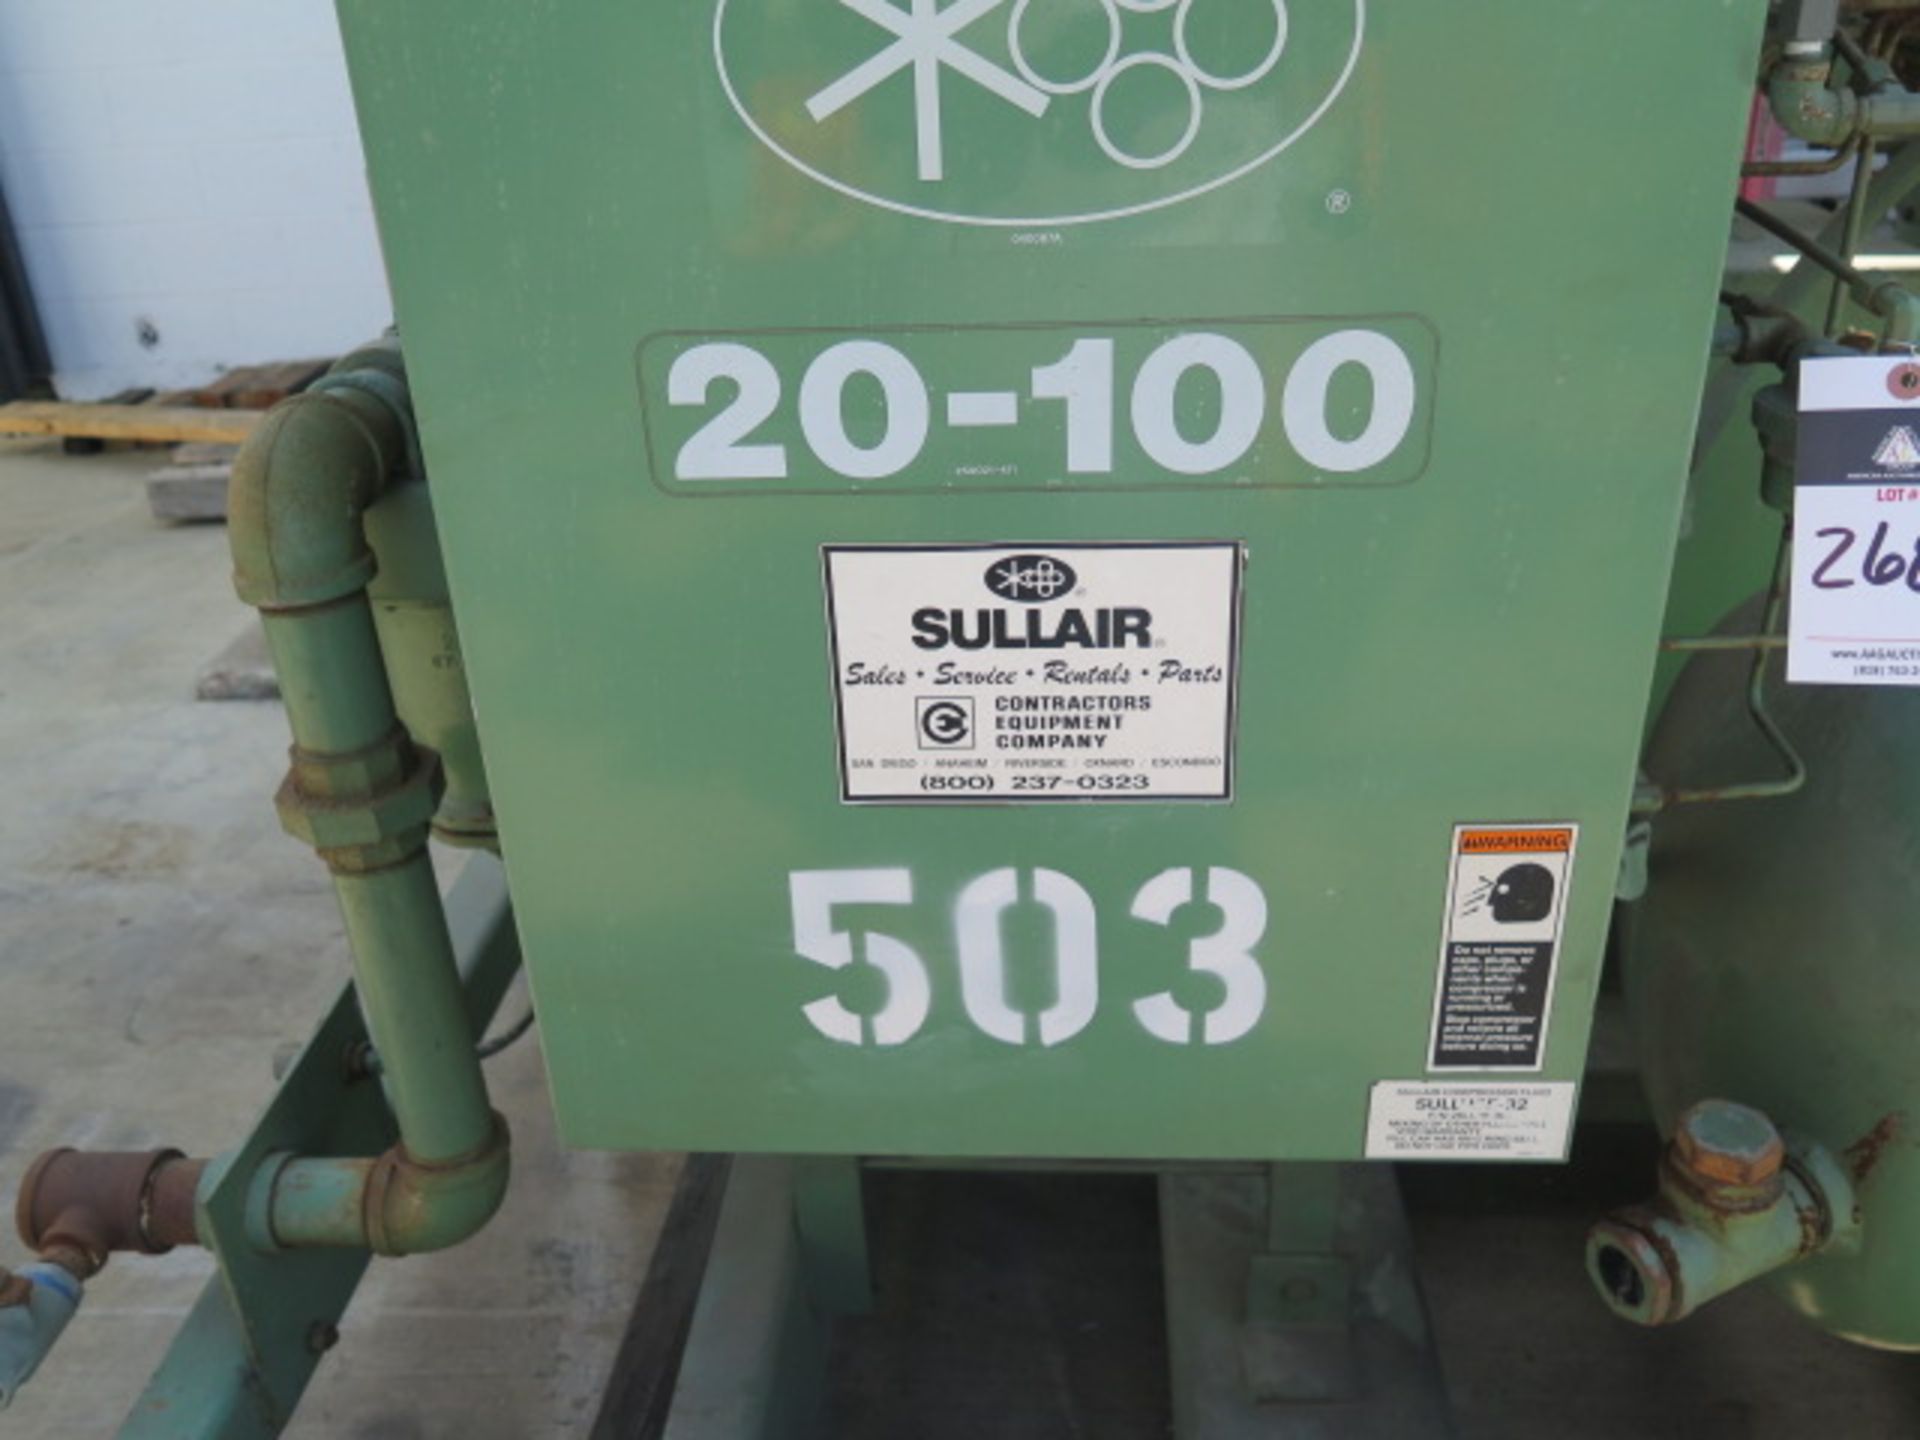 Sullair 20-100H ACAC 100Hp Rotary Screw Air Compressor s/n 003-86164 w/ Pre-Cooler - Image 6 of 7